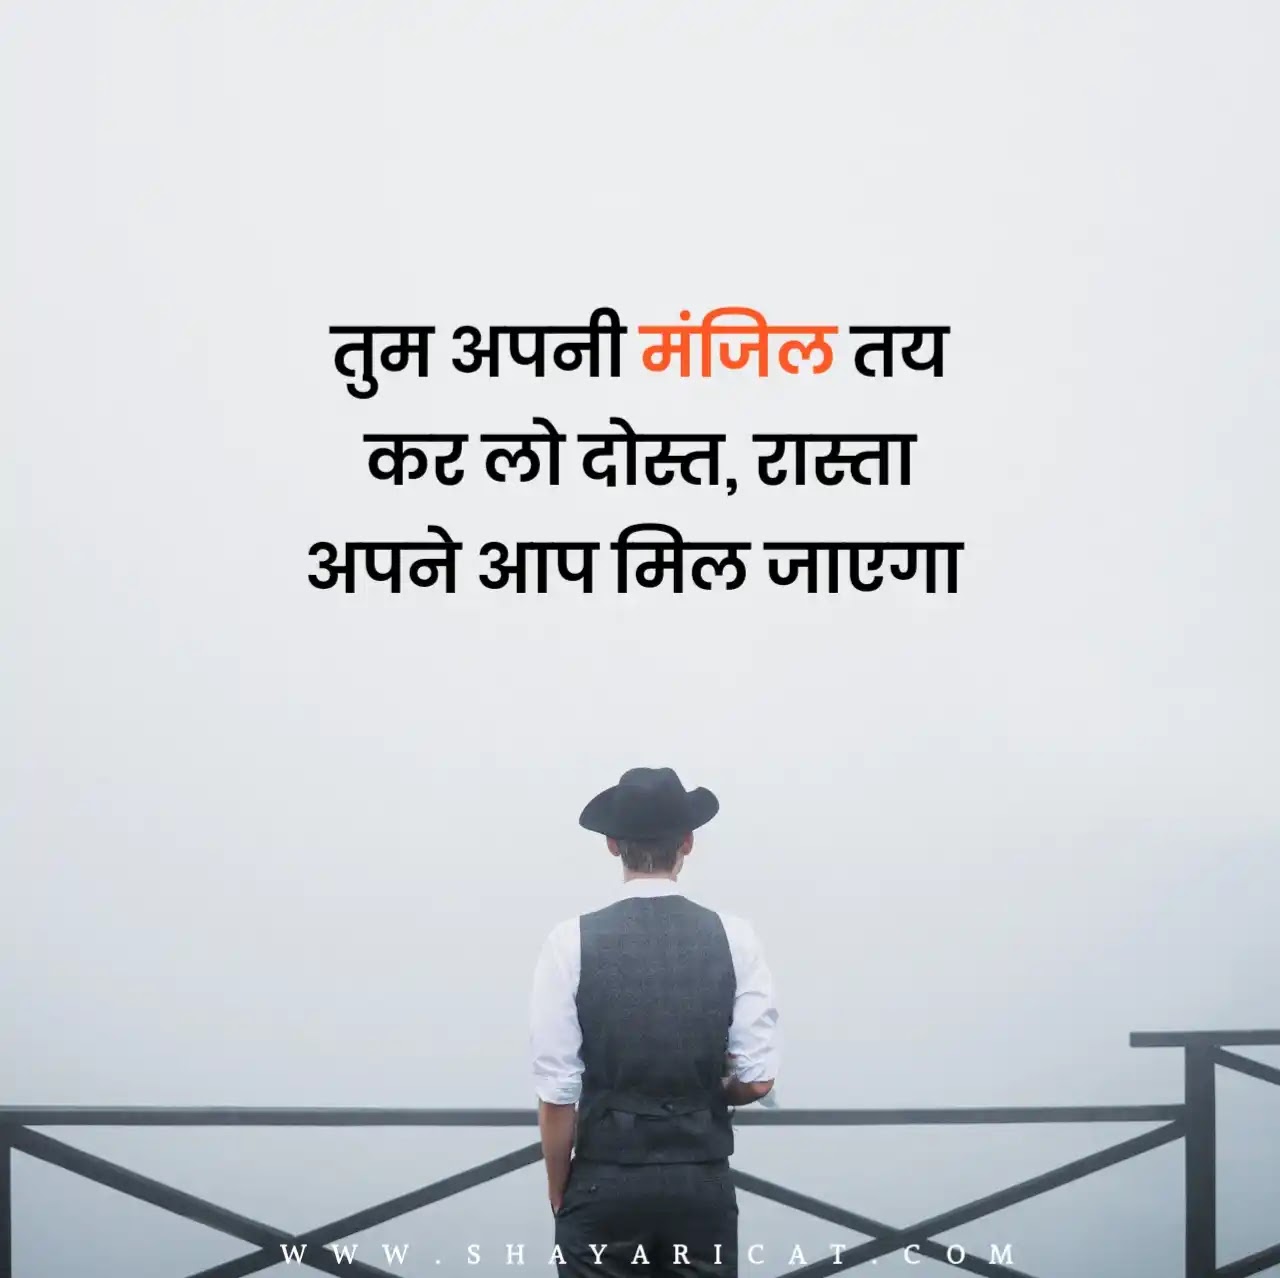 70+] Struggle Motivational Quotes in Hindi | संघर्ष ...